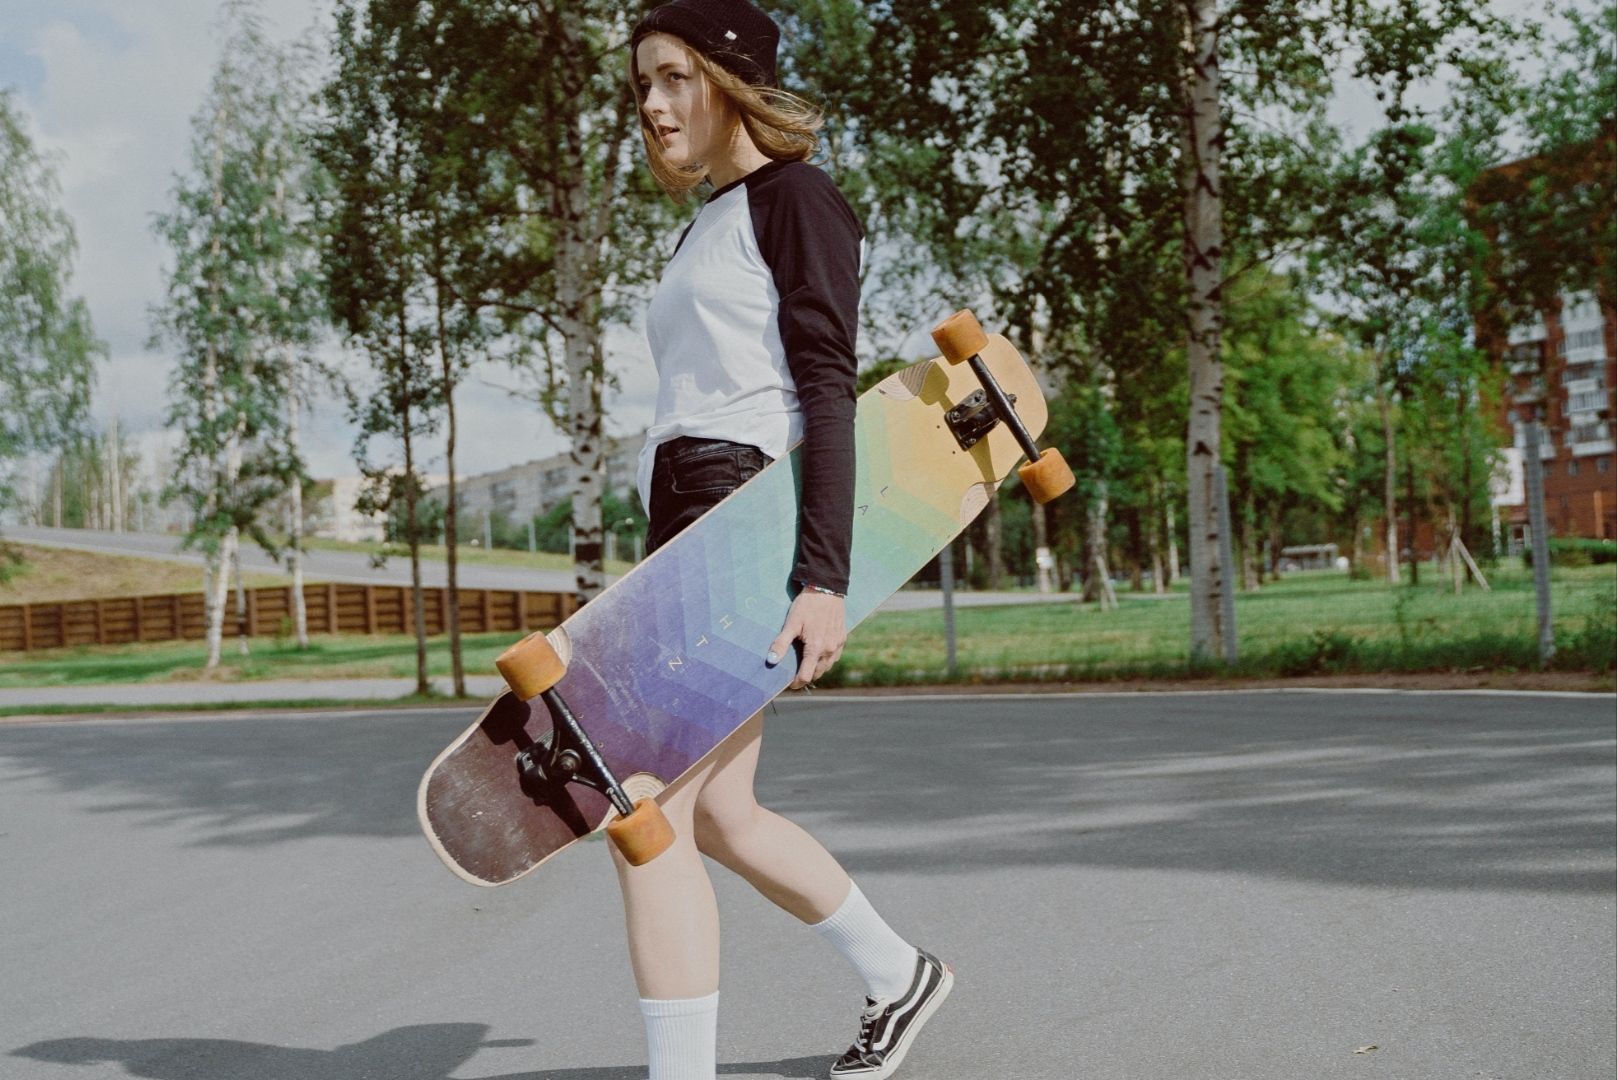 Photo by cottonbro studio: https://www.pexels.com/photo/woman-in-white-and-black-long-sleeve-shirt-holding-a-longboard-5026425/